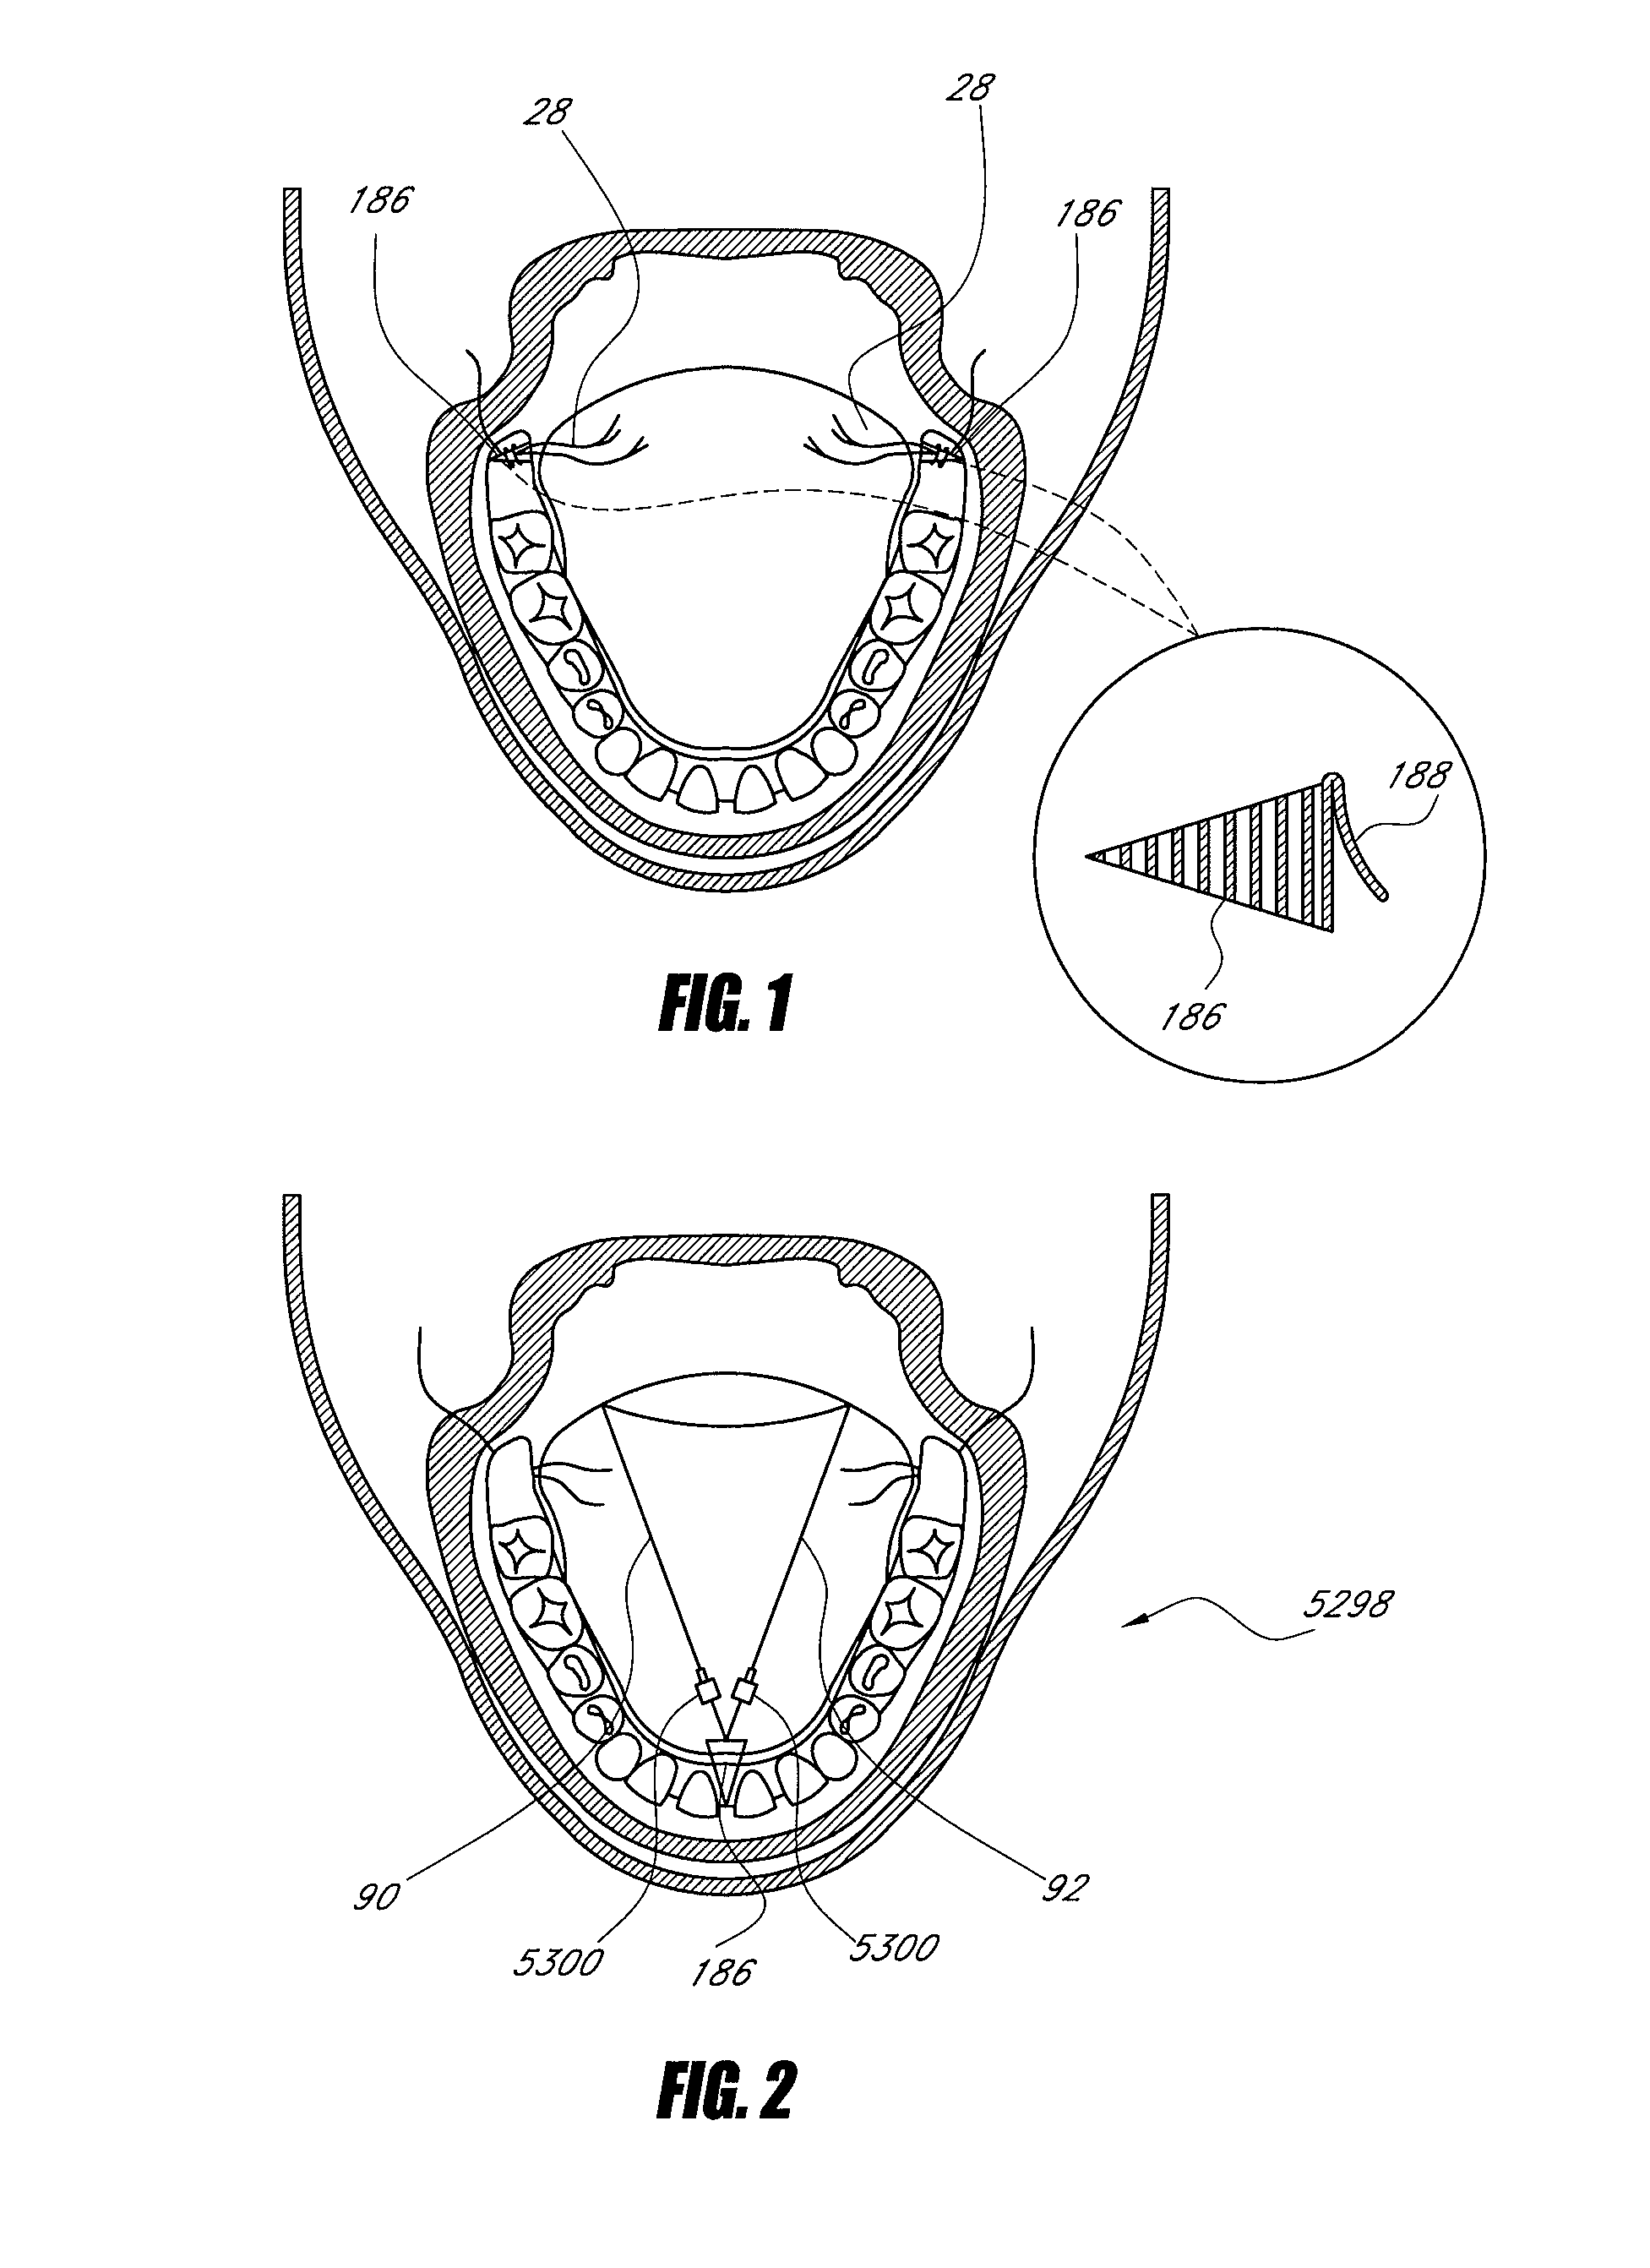 Methods and devices for the treatment of airway obstruction, sleep apnea and snoring